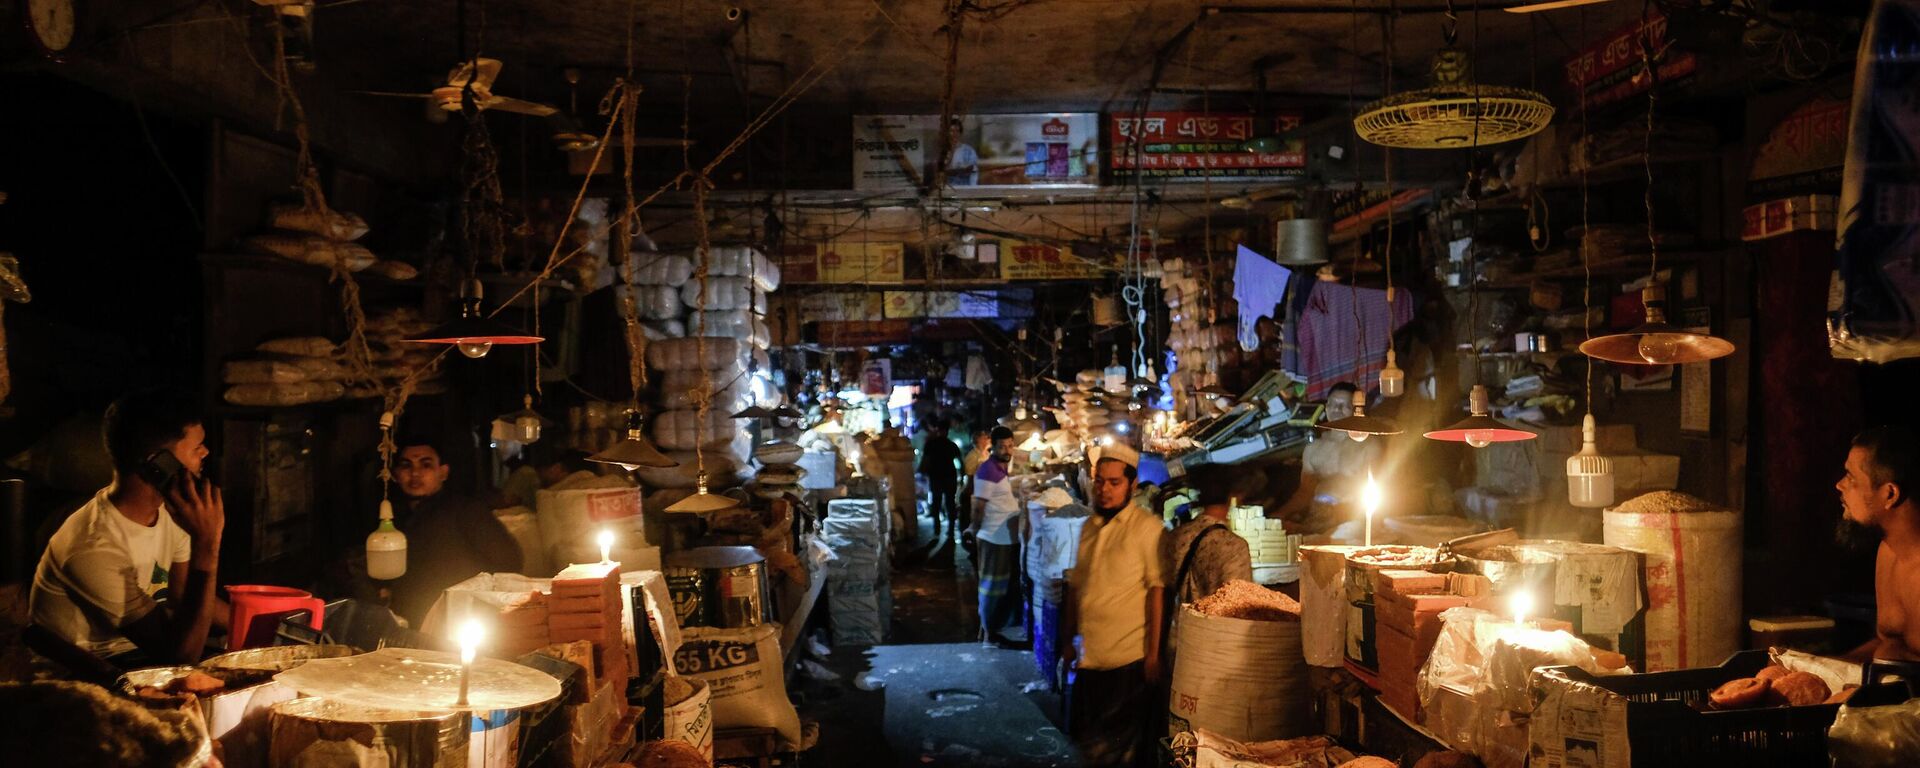 Vendors light candles at a market after a failure in Bangladesh's national power grid plunged much of the country into a blackout in Dhaka, Bangladesh, Tuesday, Oct.4, 2022. - Sputnik International, 1920, 04.10.2022